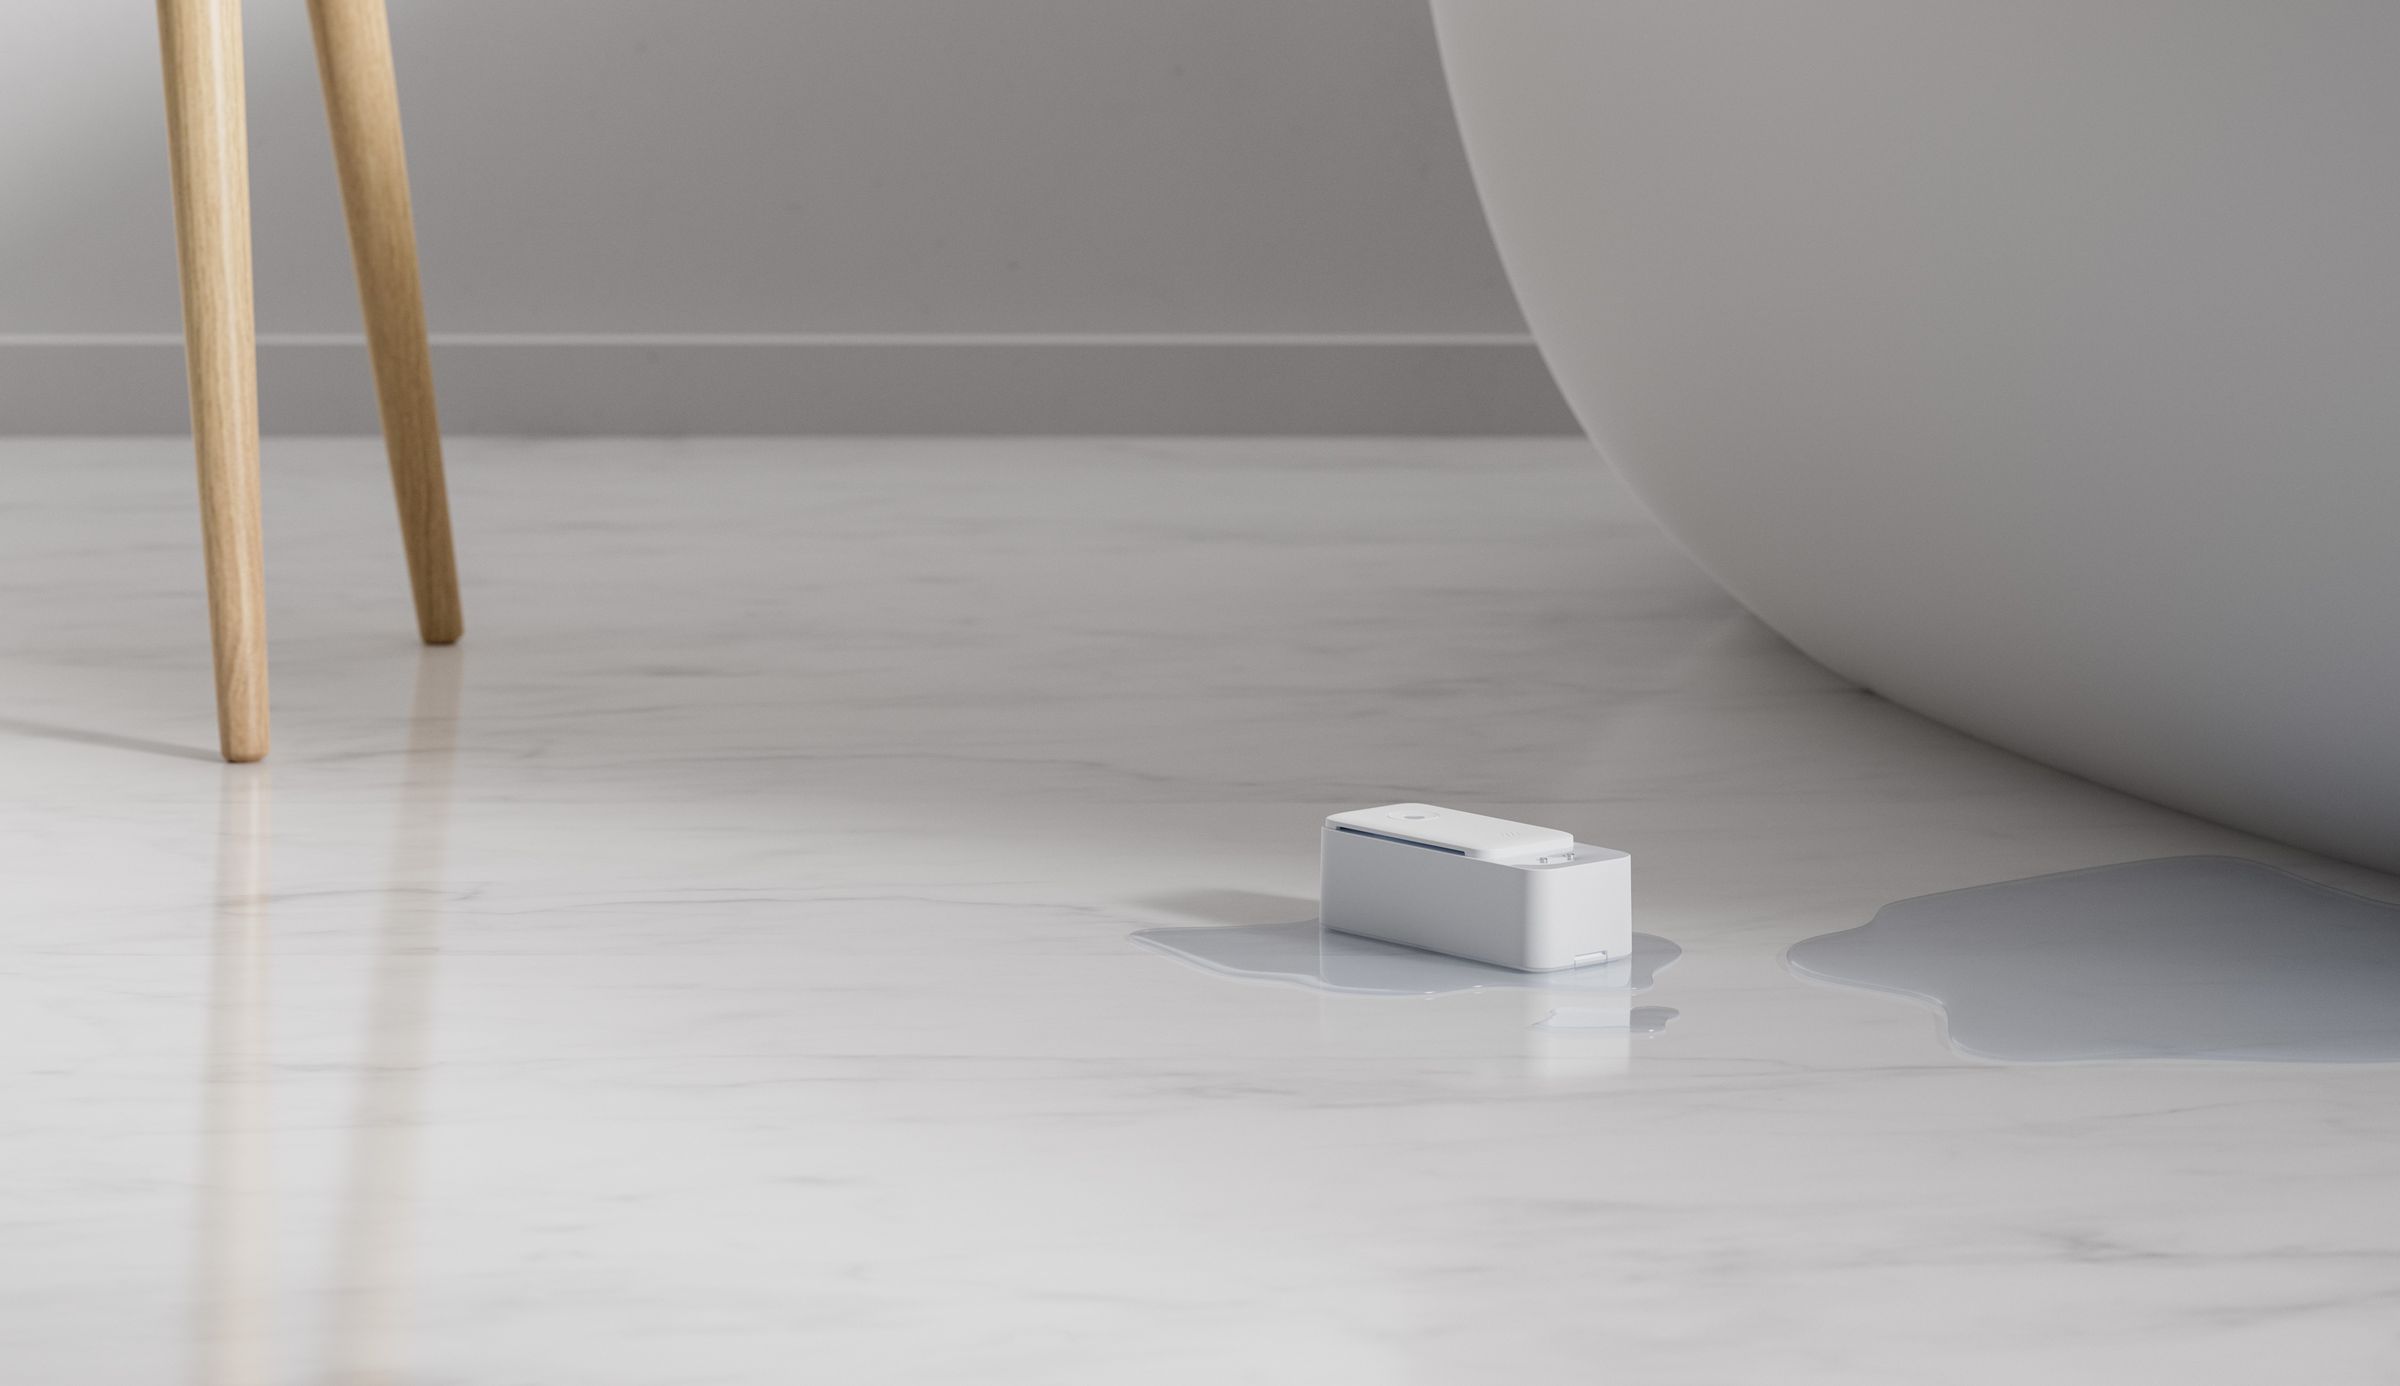 <em>SwitchBot claims it can detect water levels as low as 0.5mm and will sound a 100dB alarm and send an alert to your phone.</em>